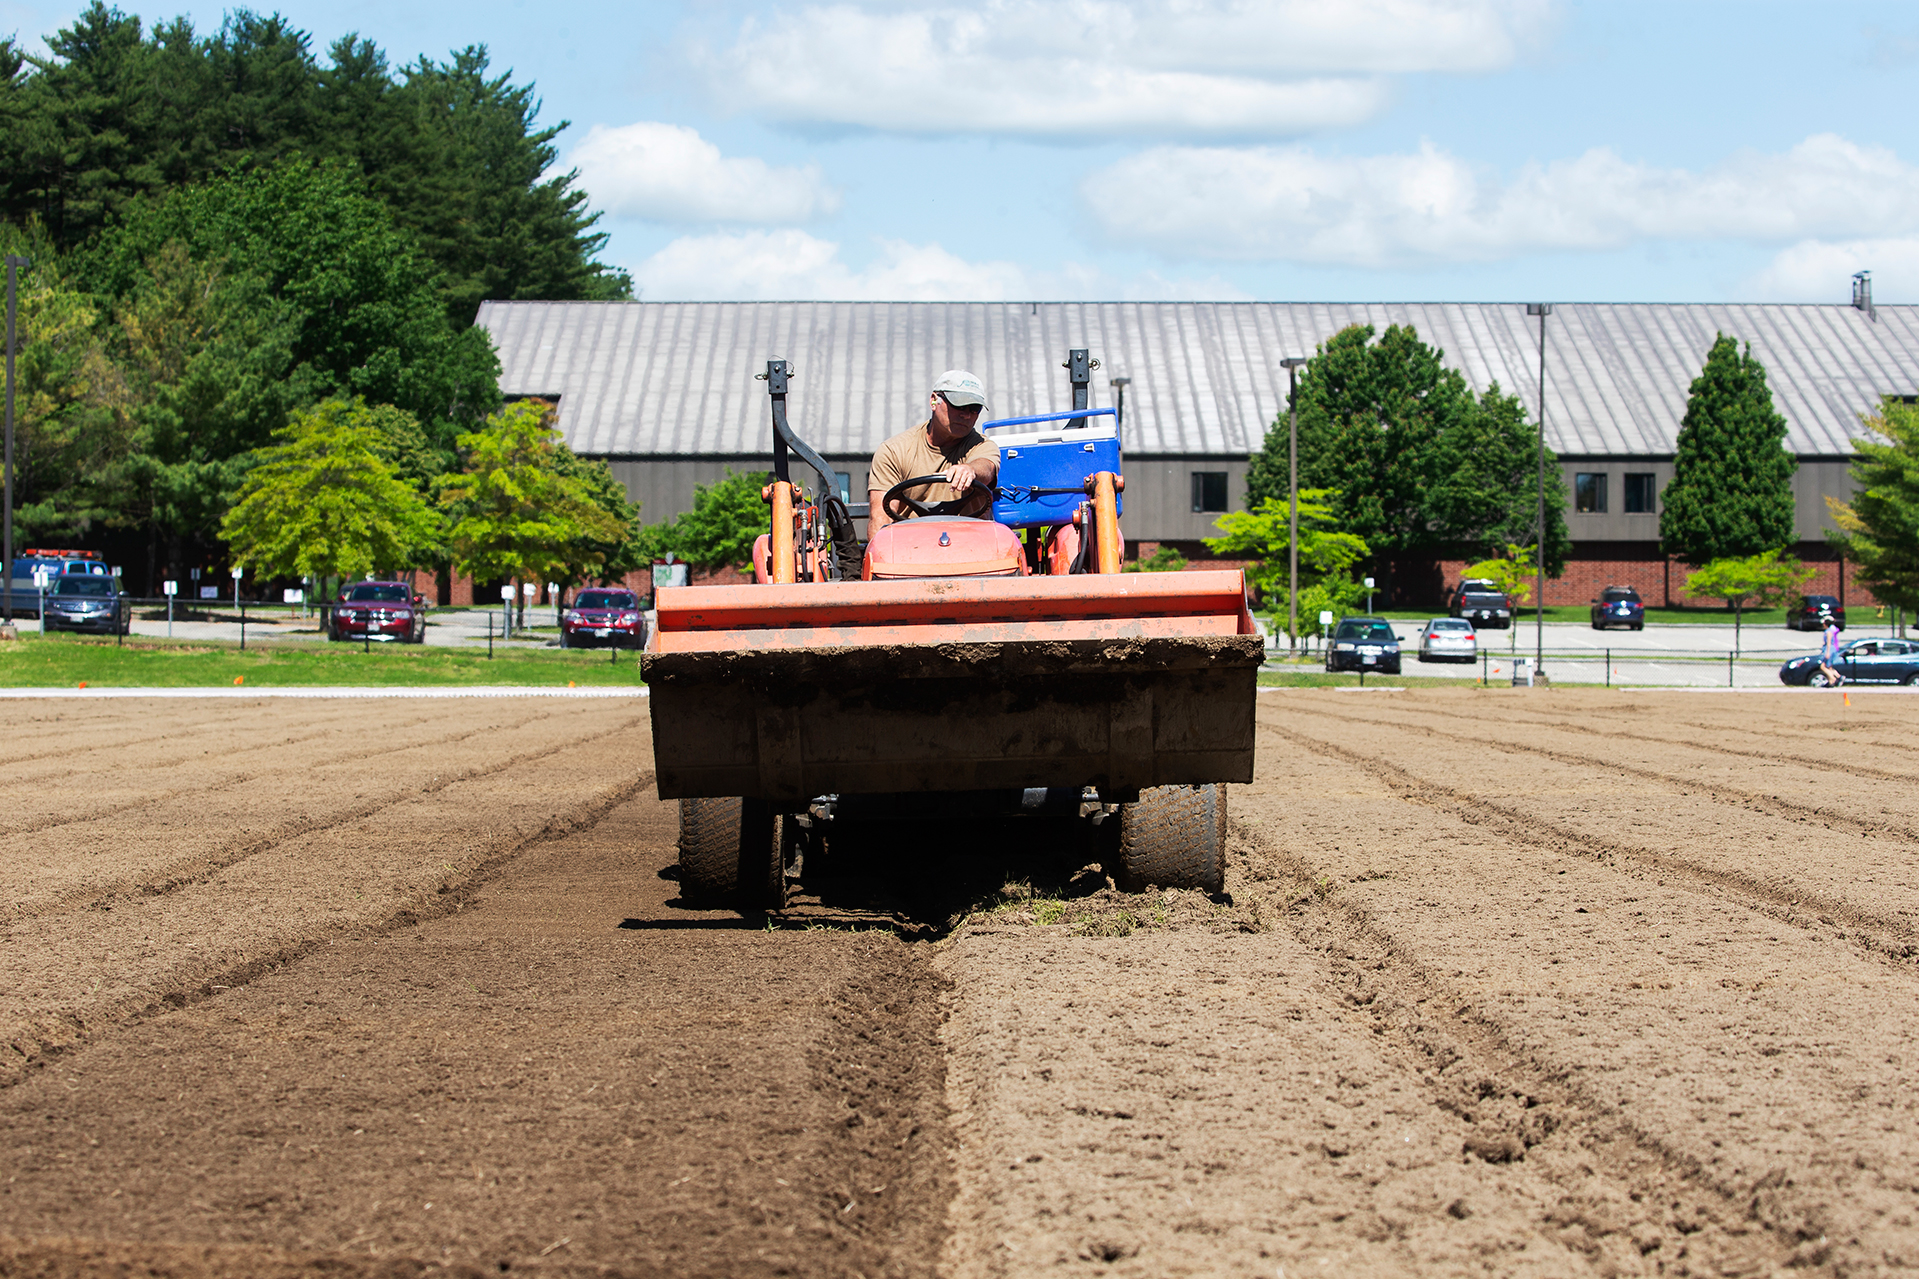 A laser-guided land leveler prepares the Russell Street soccer field for its new sod in mid-June. (Theophil Syslo/Bates College)